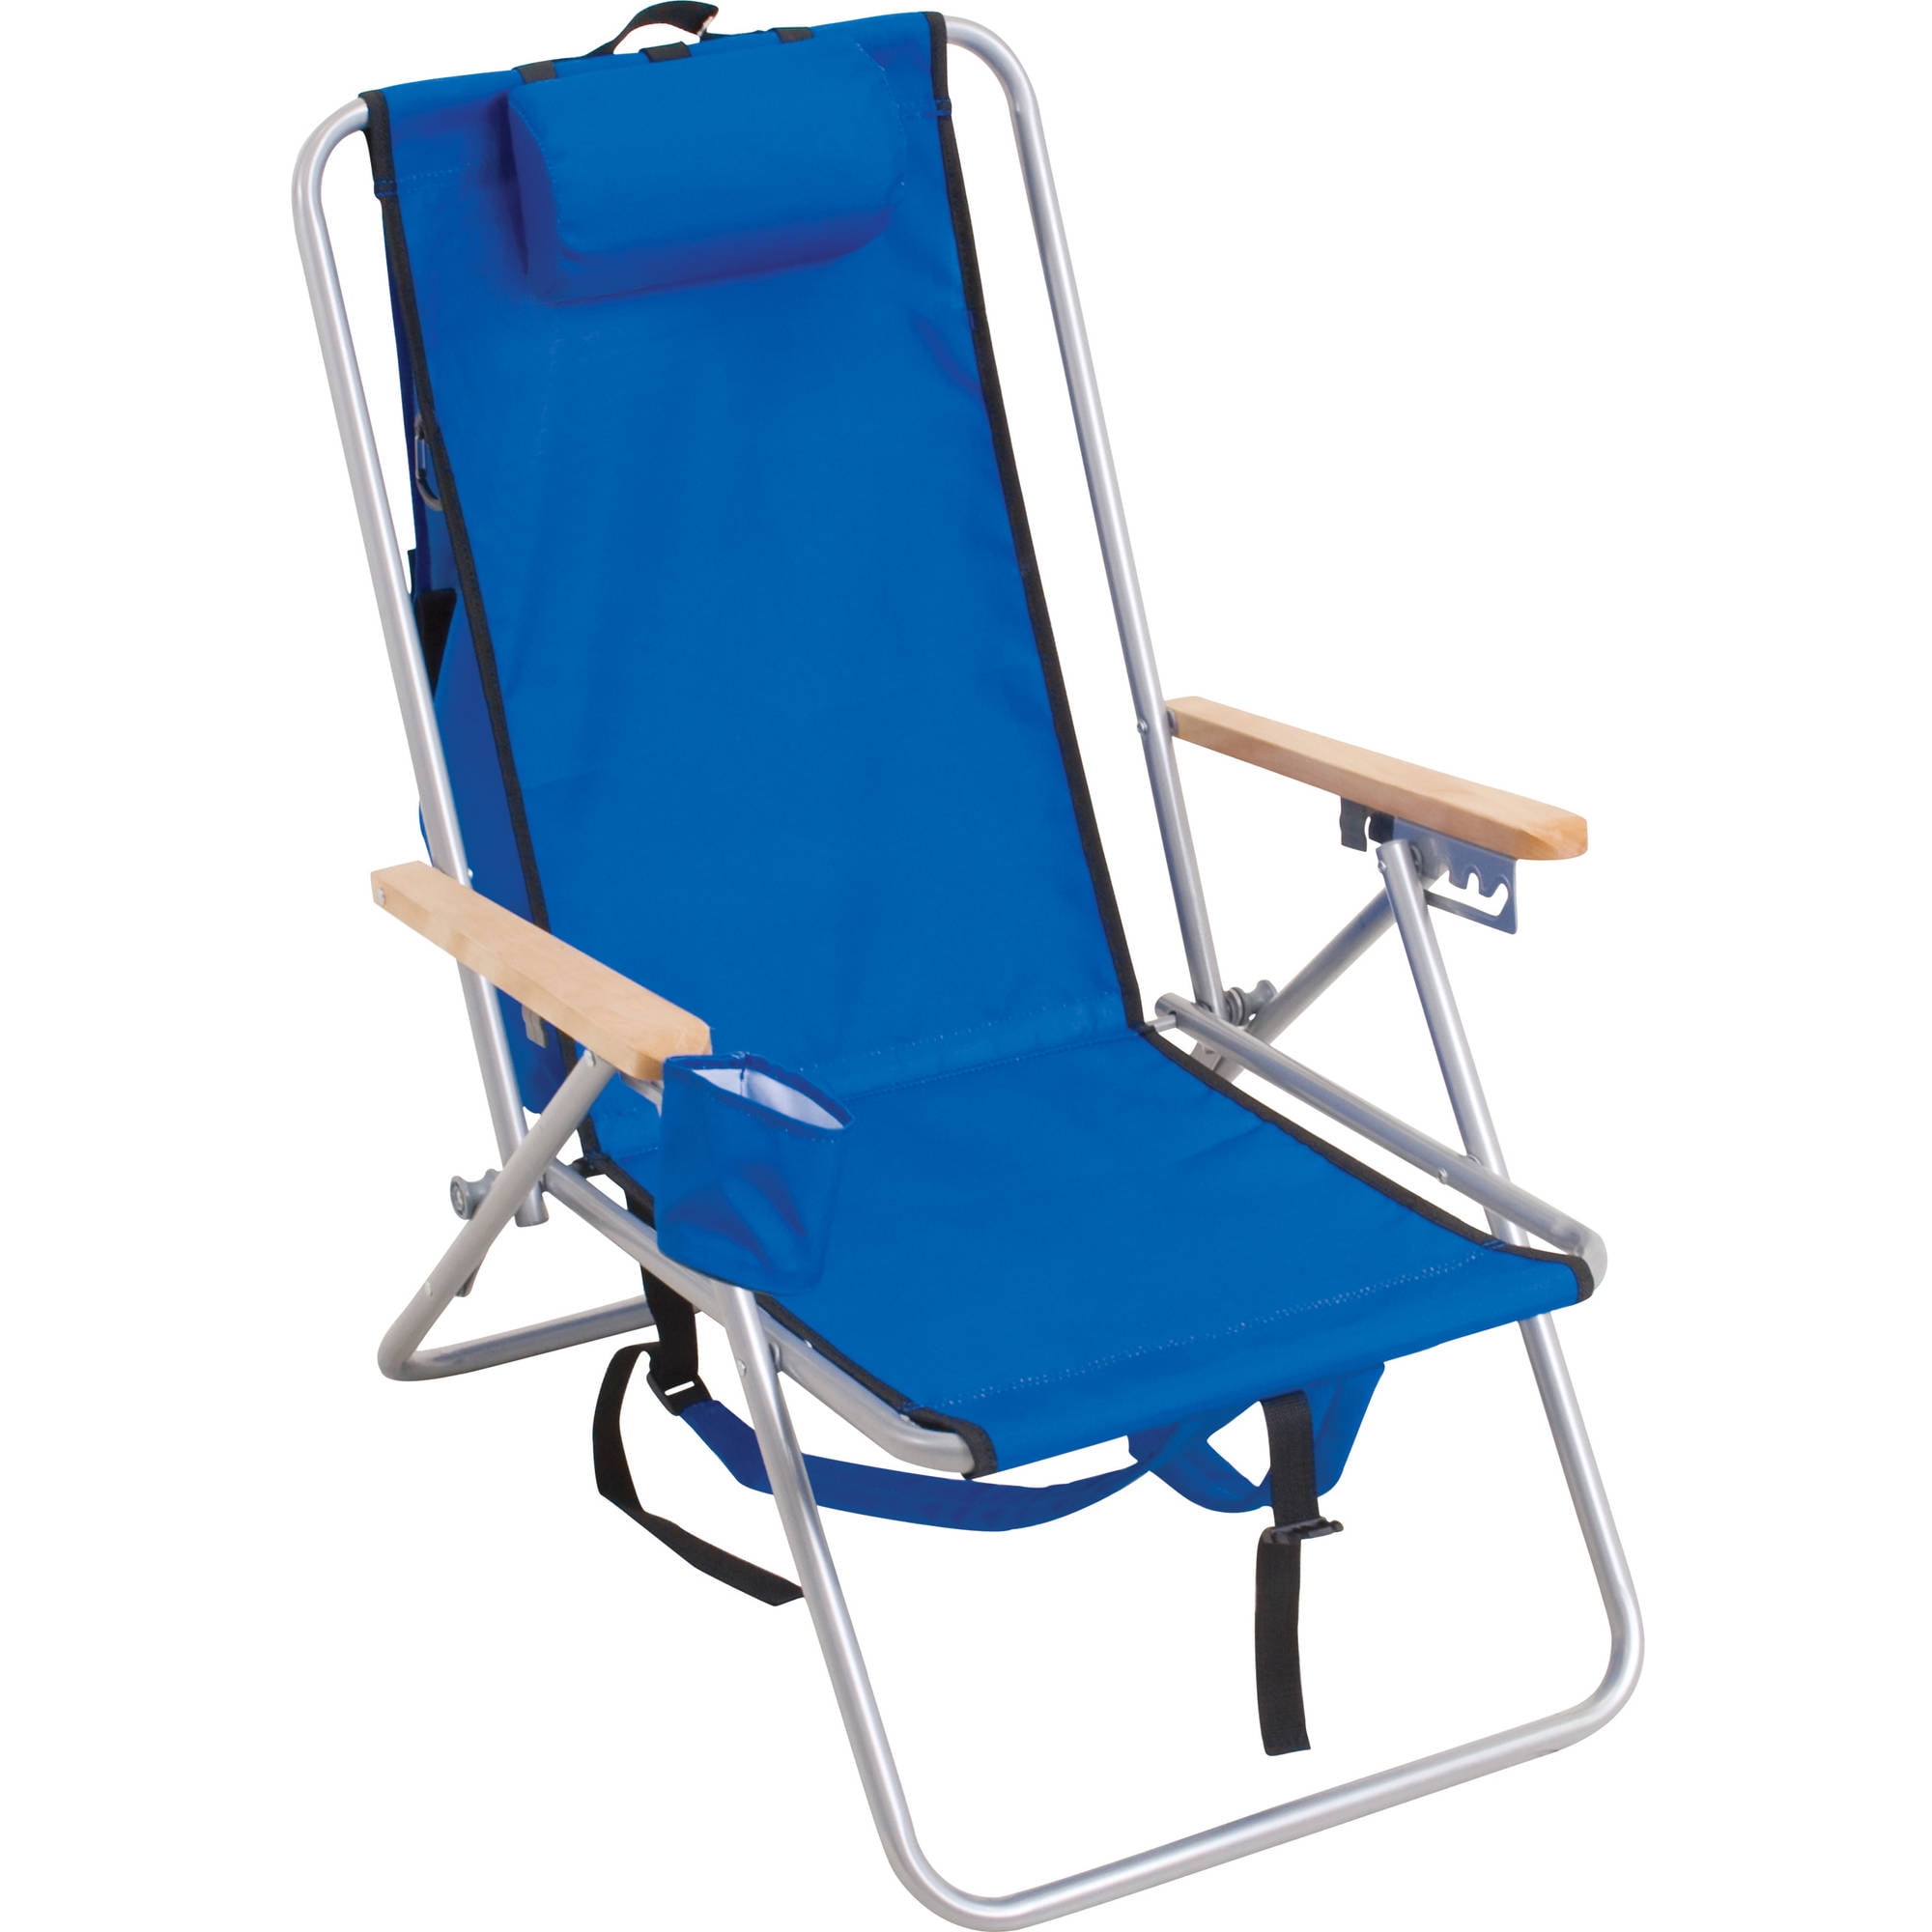 Unique Backpack Beach Chair Walgreens for Small Space